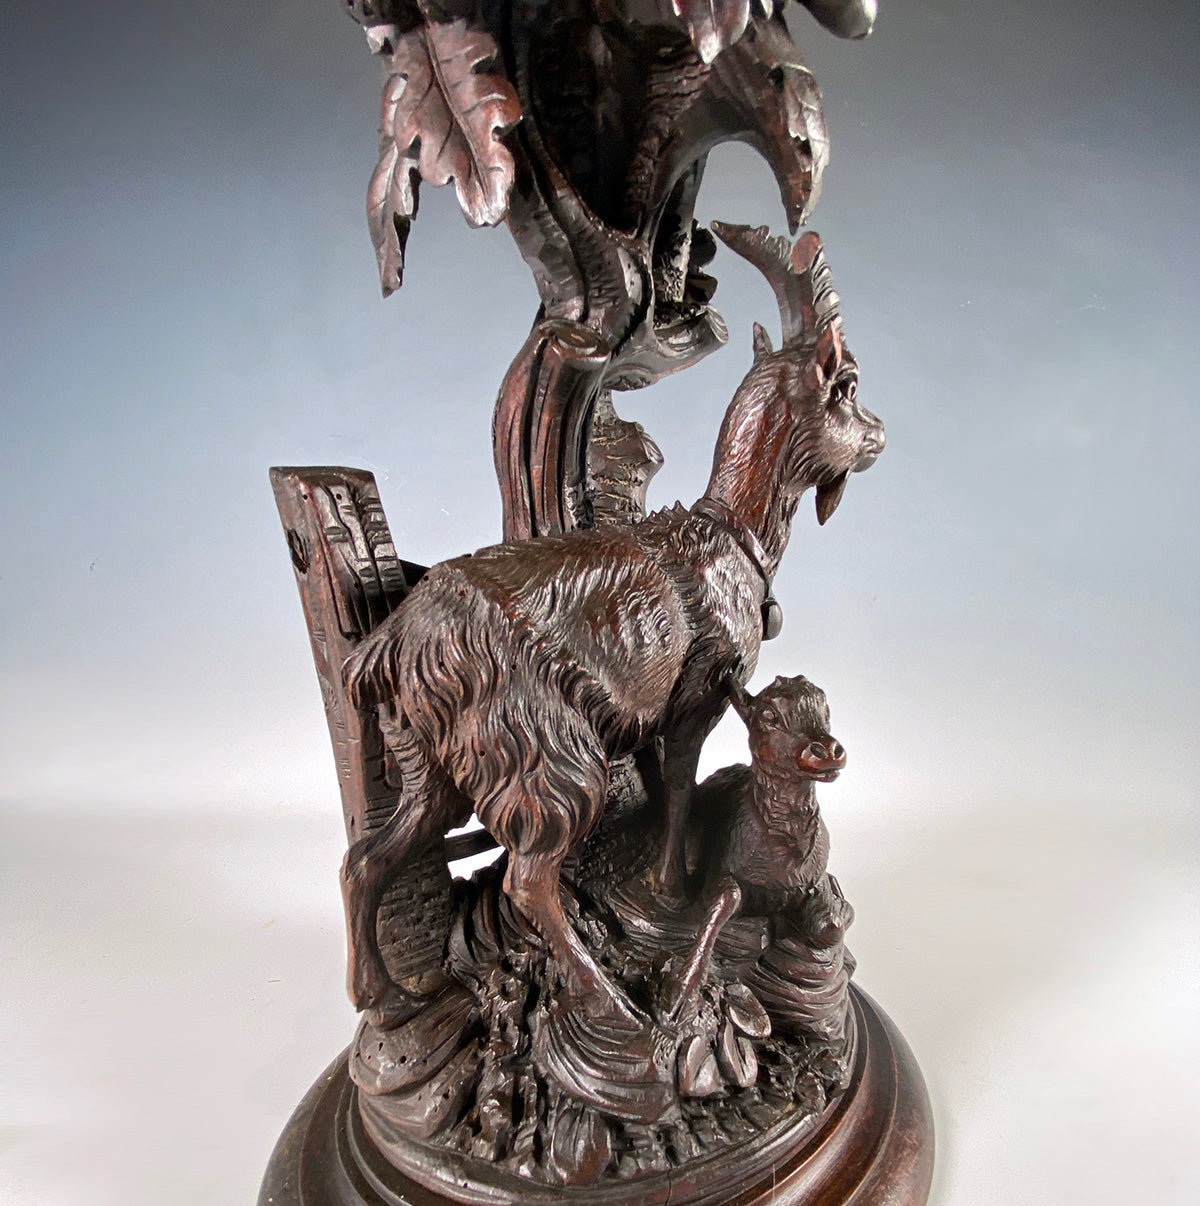 Large Antique Swiss Black Forest Game Carving 14.5" Tall, Candle or Lamp Stand, Epergne Stand